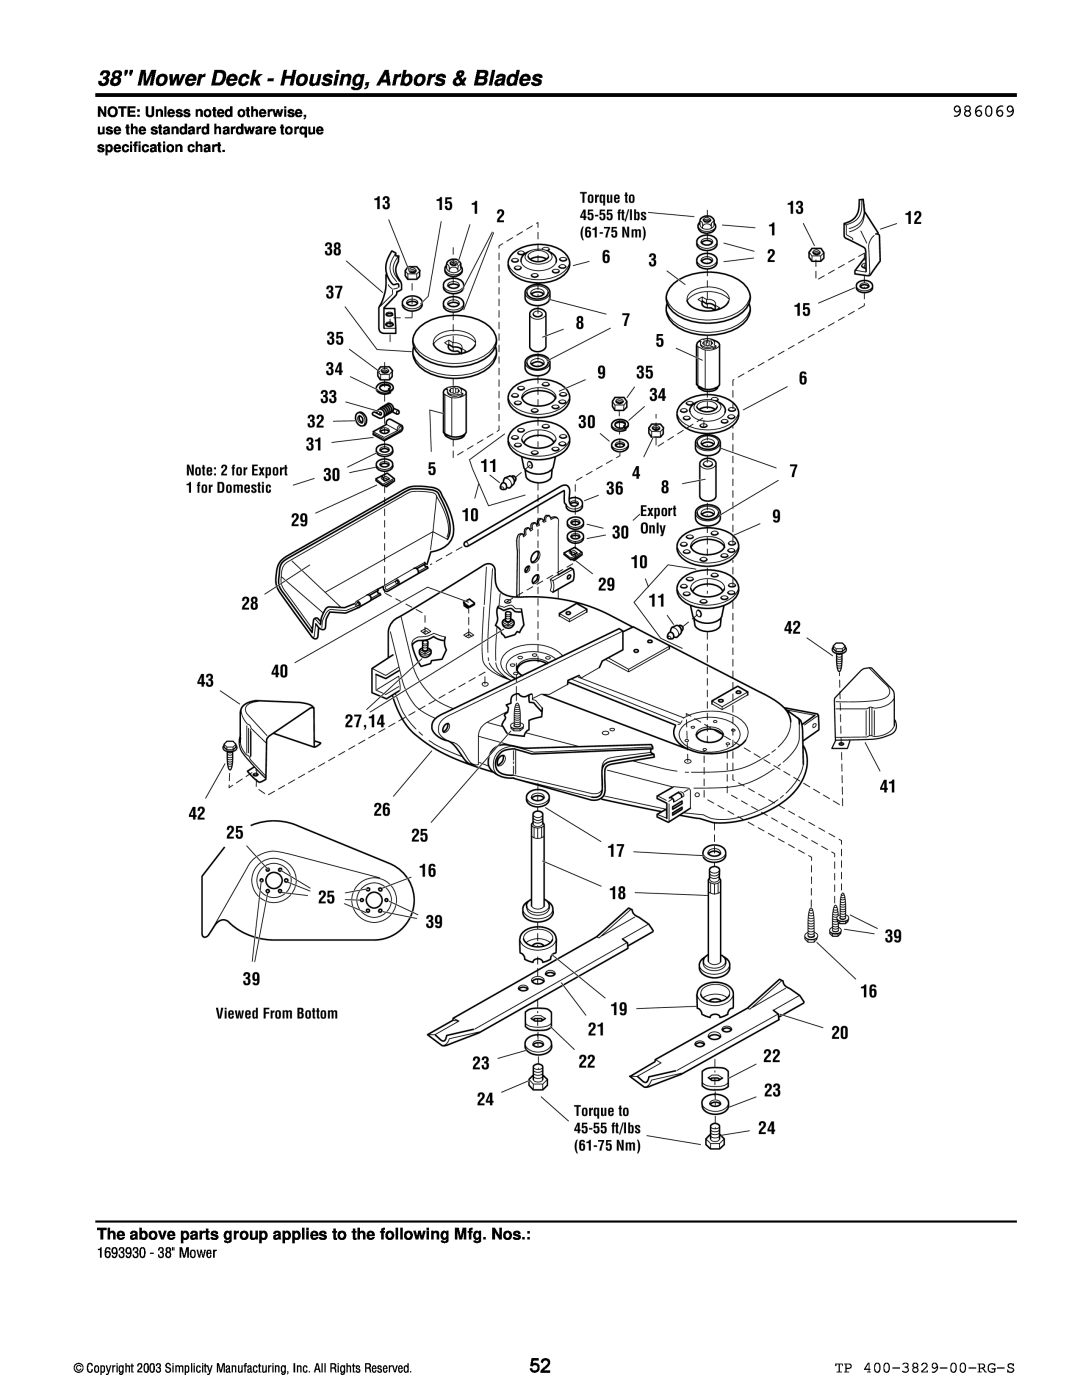 Simplicity 1694310 986069, Mower Deck - Housing, Arbors & Blades, TP 400-3829-00-RG-S, NOTE Unless noted otherwise, Only 